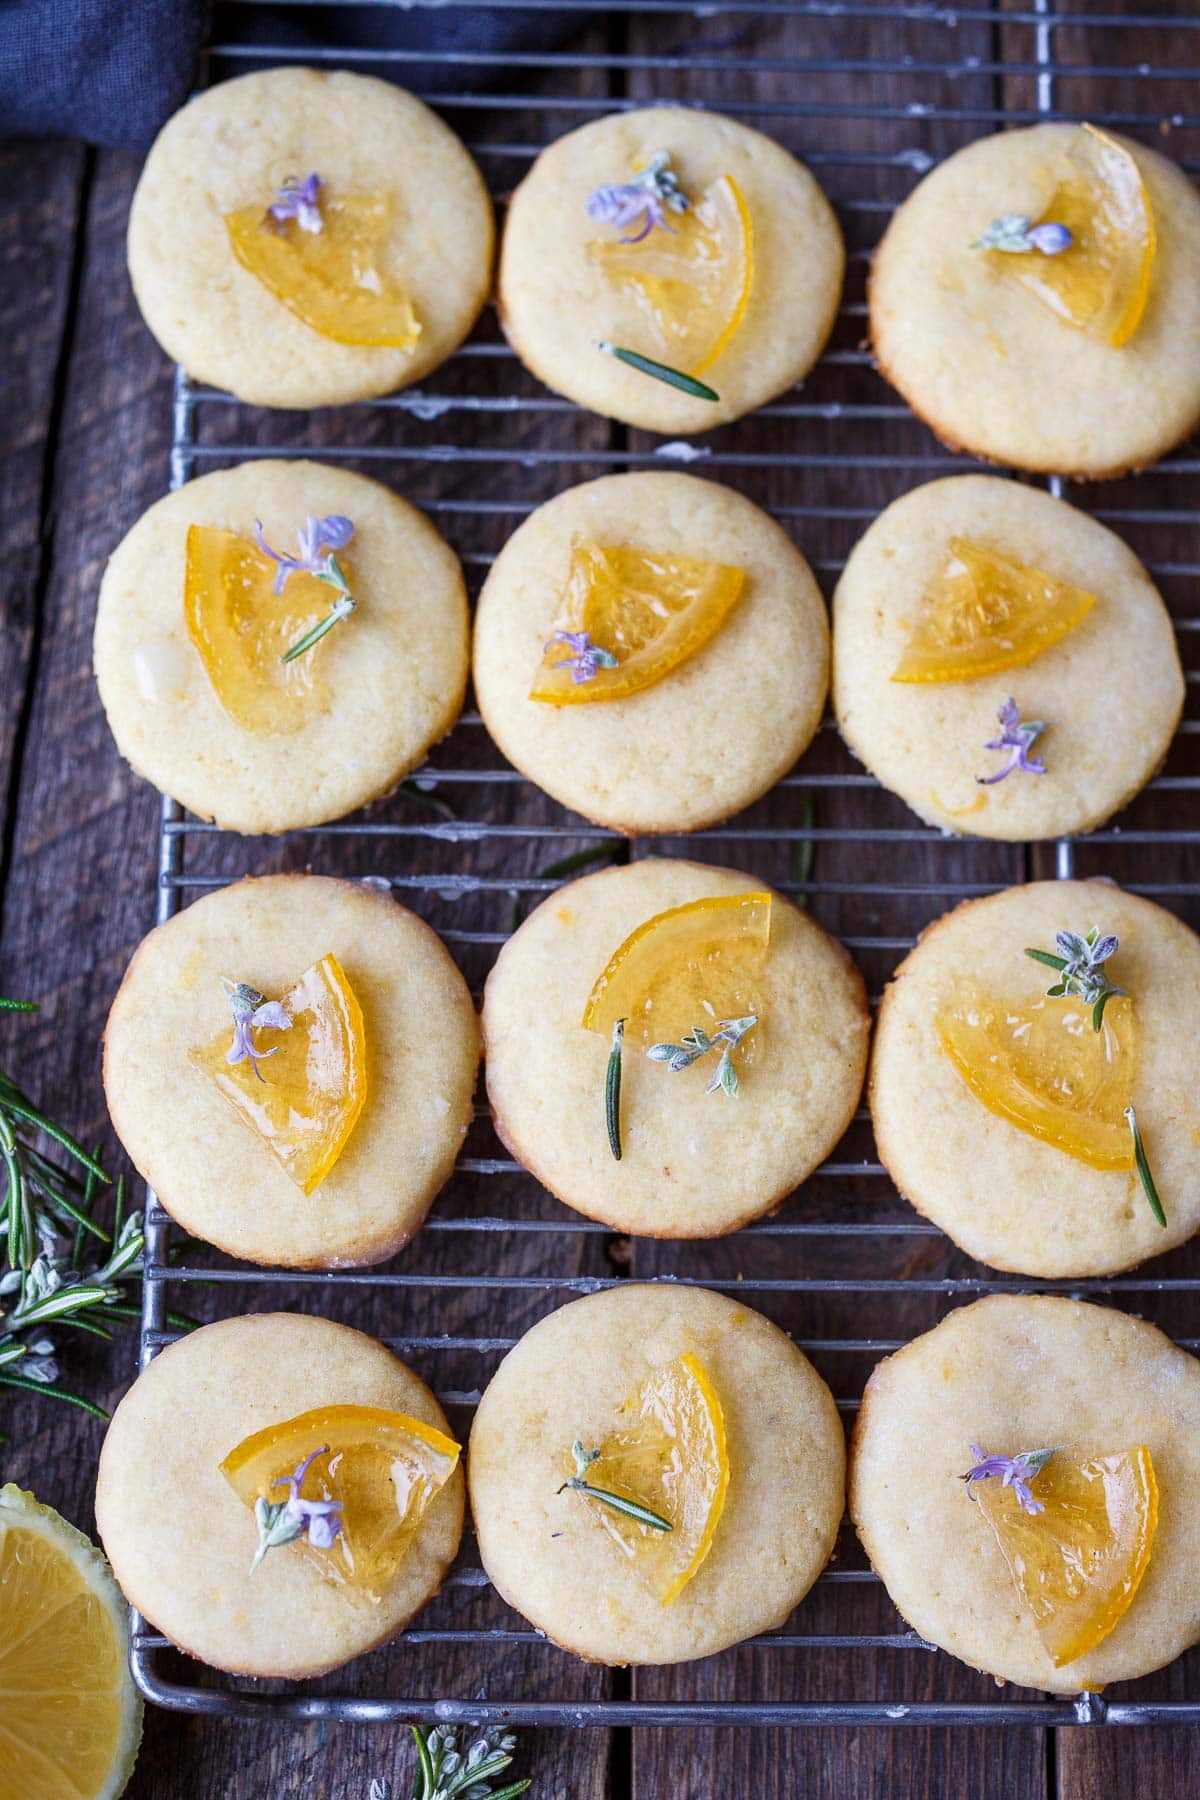 lemon cookies on cooling rack with candied lemons, rosemary, and rosemary flowers, drizzled with lemon glaze.